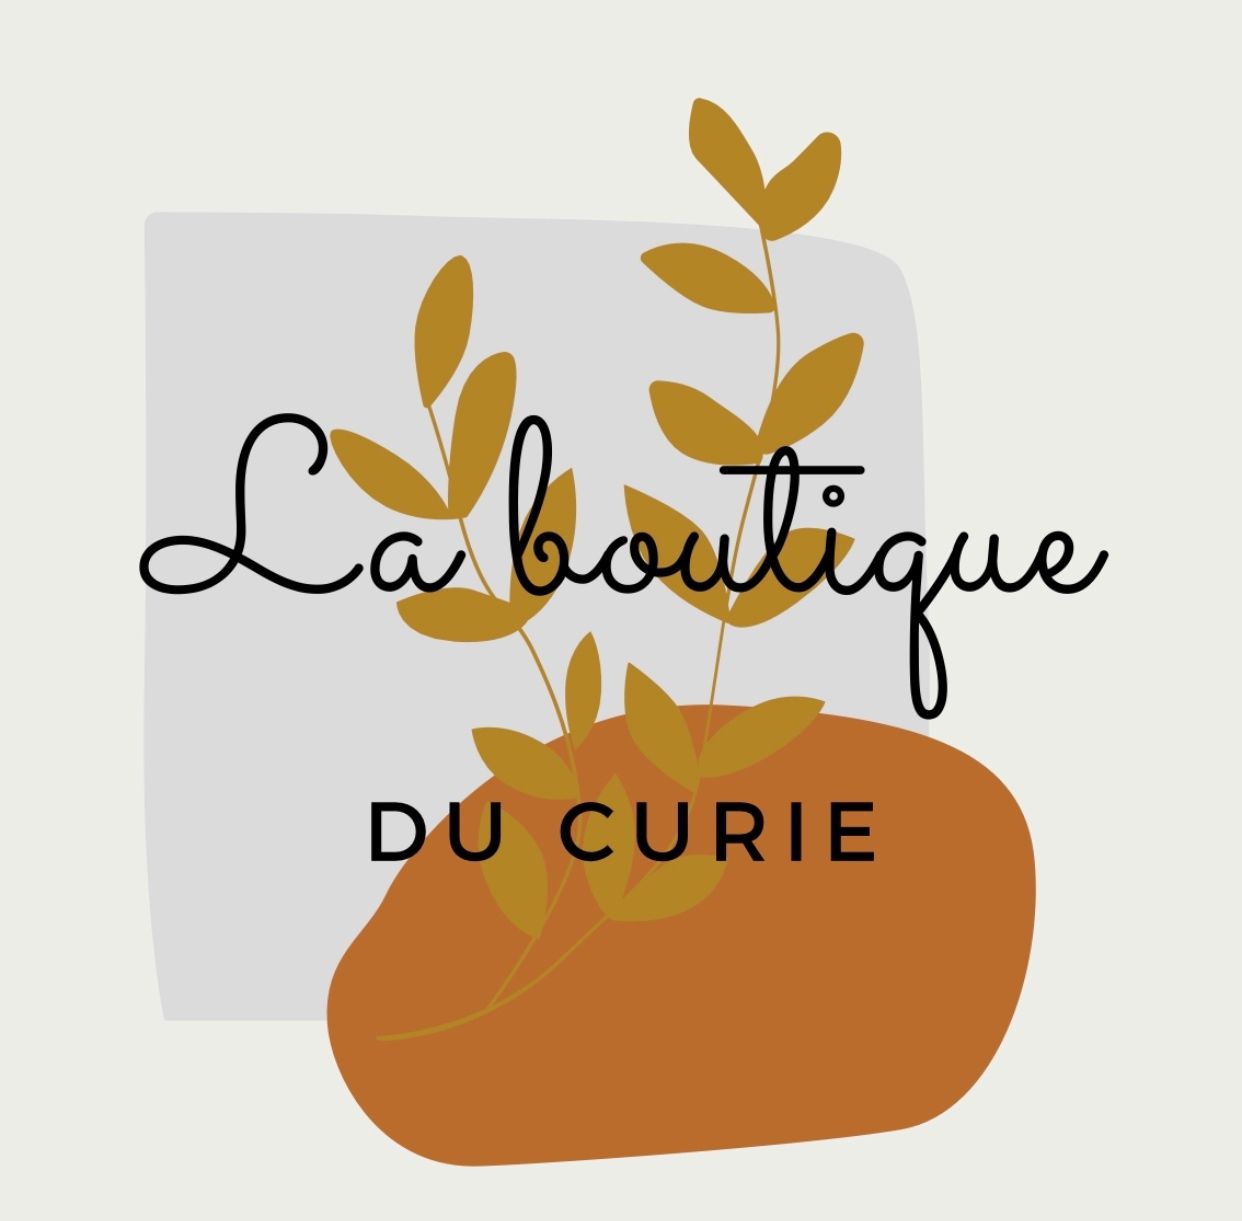 This shop is called LaBoutiqueDuCurie 